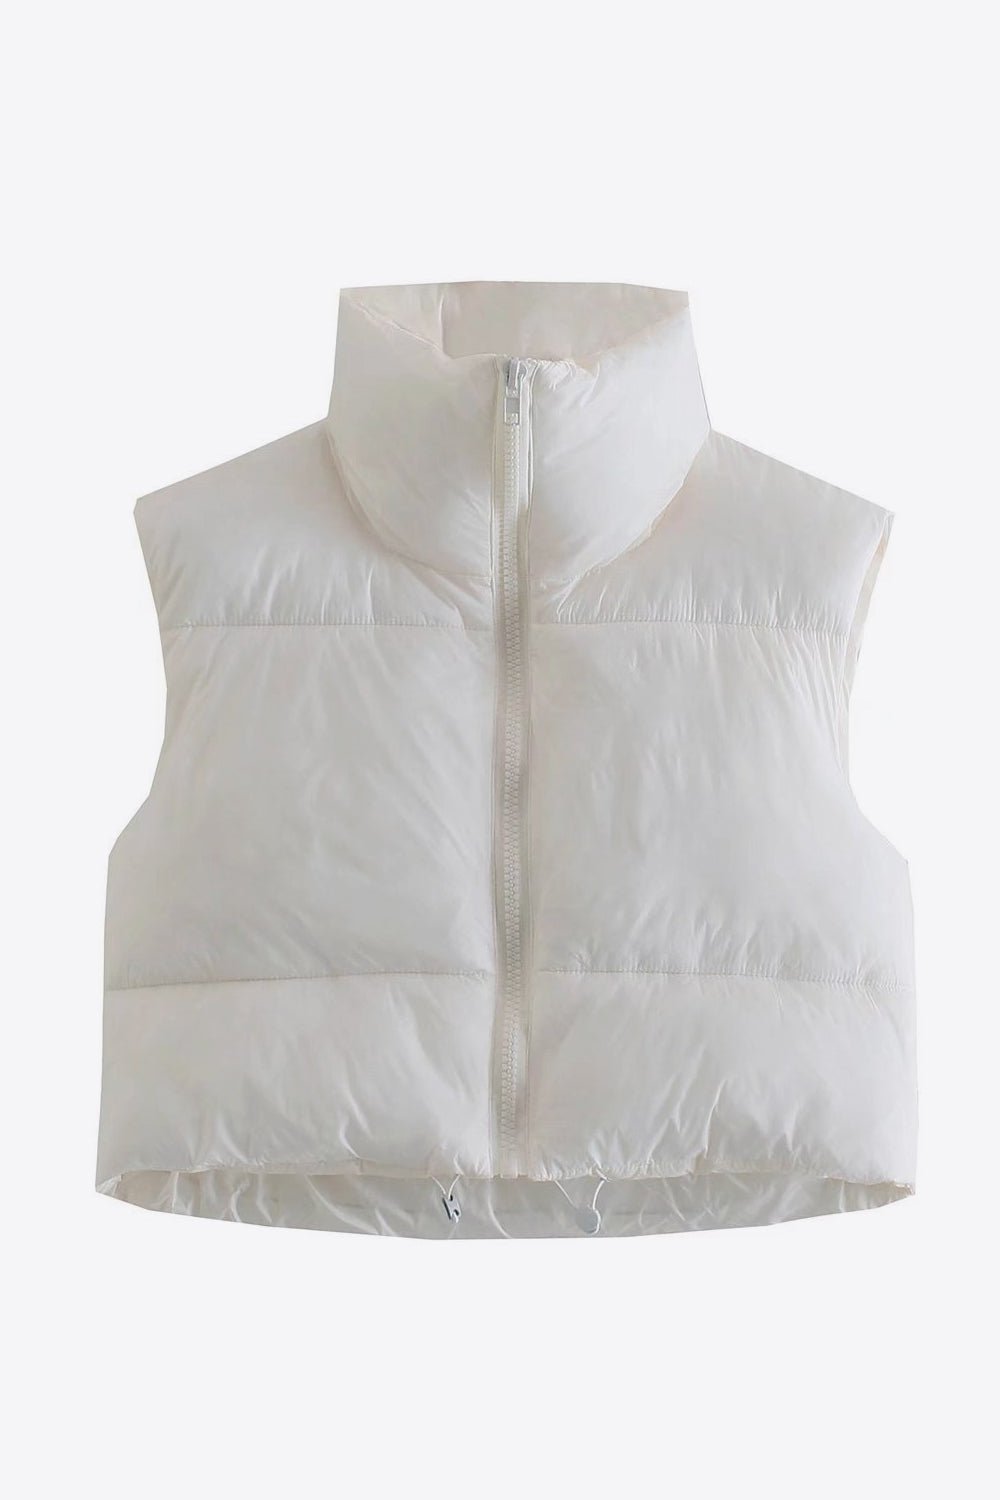 My Fave Puffer Vest